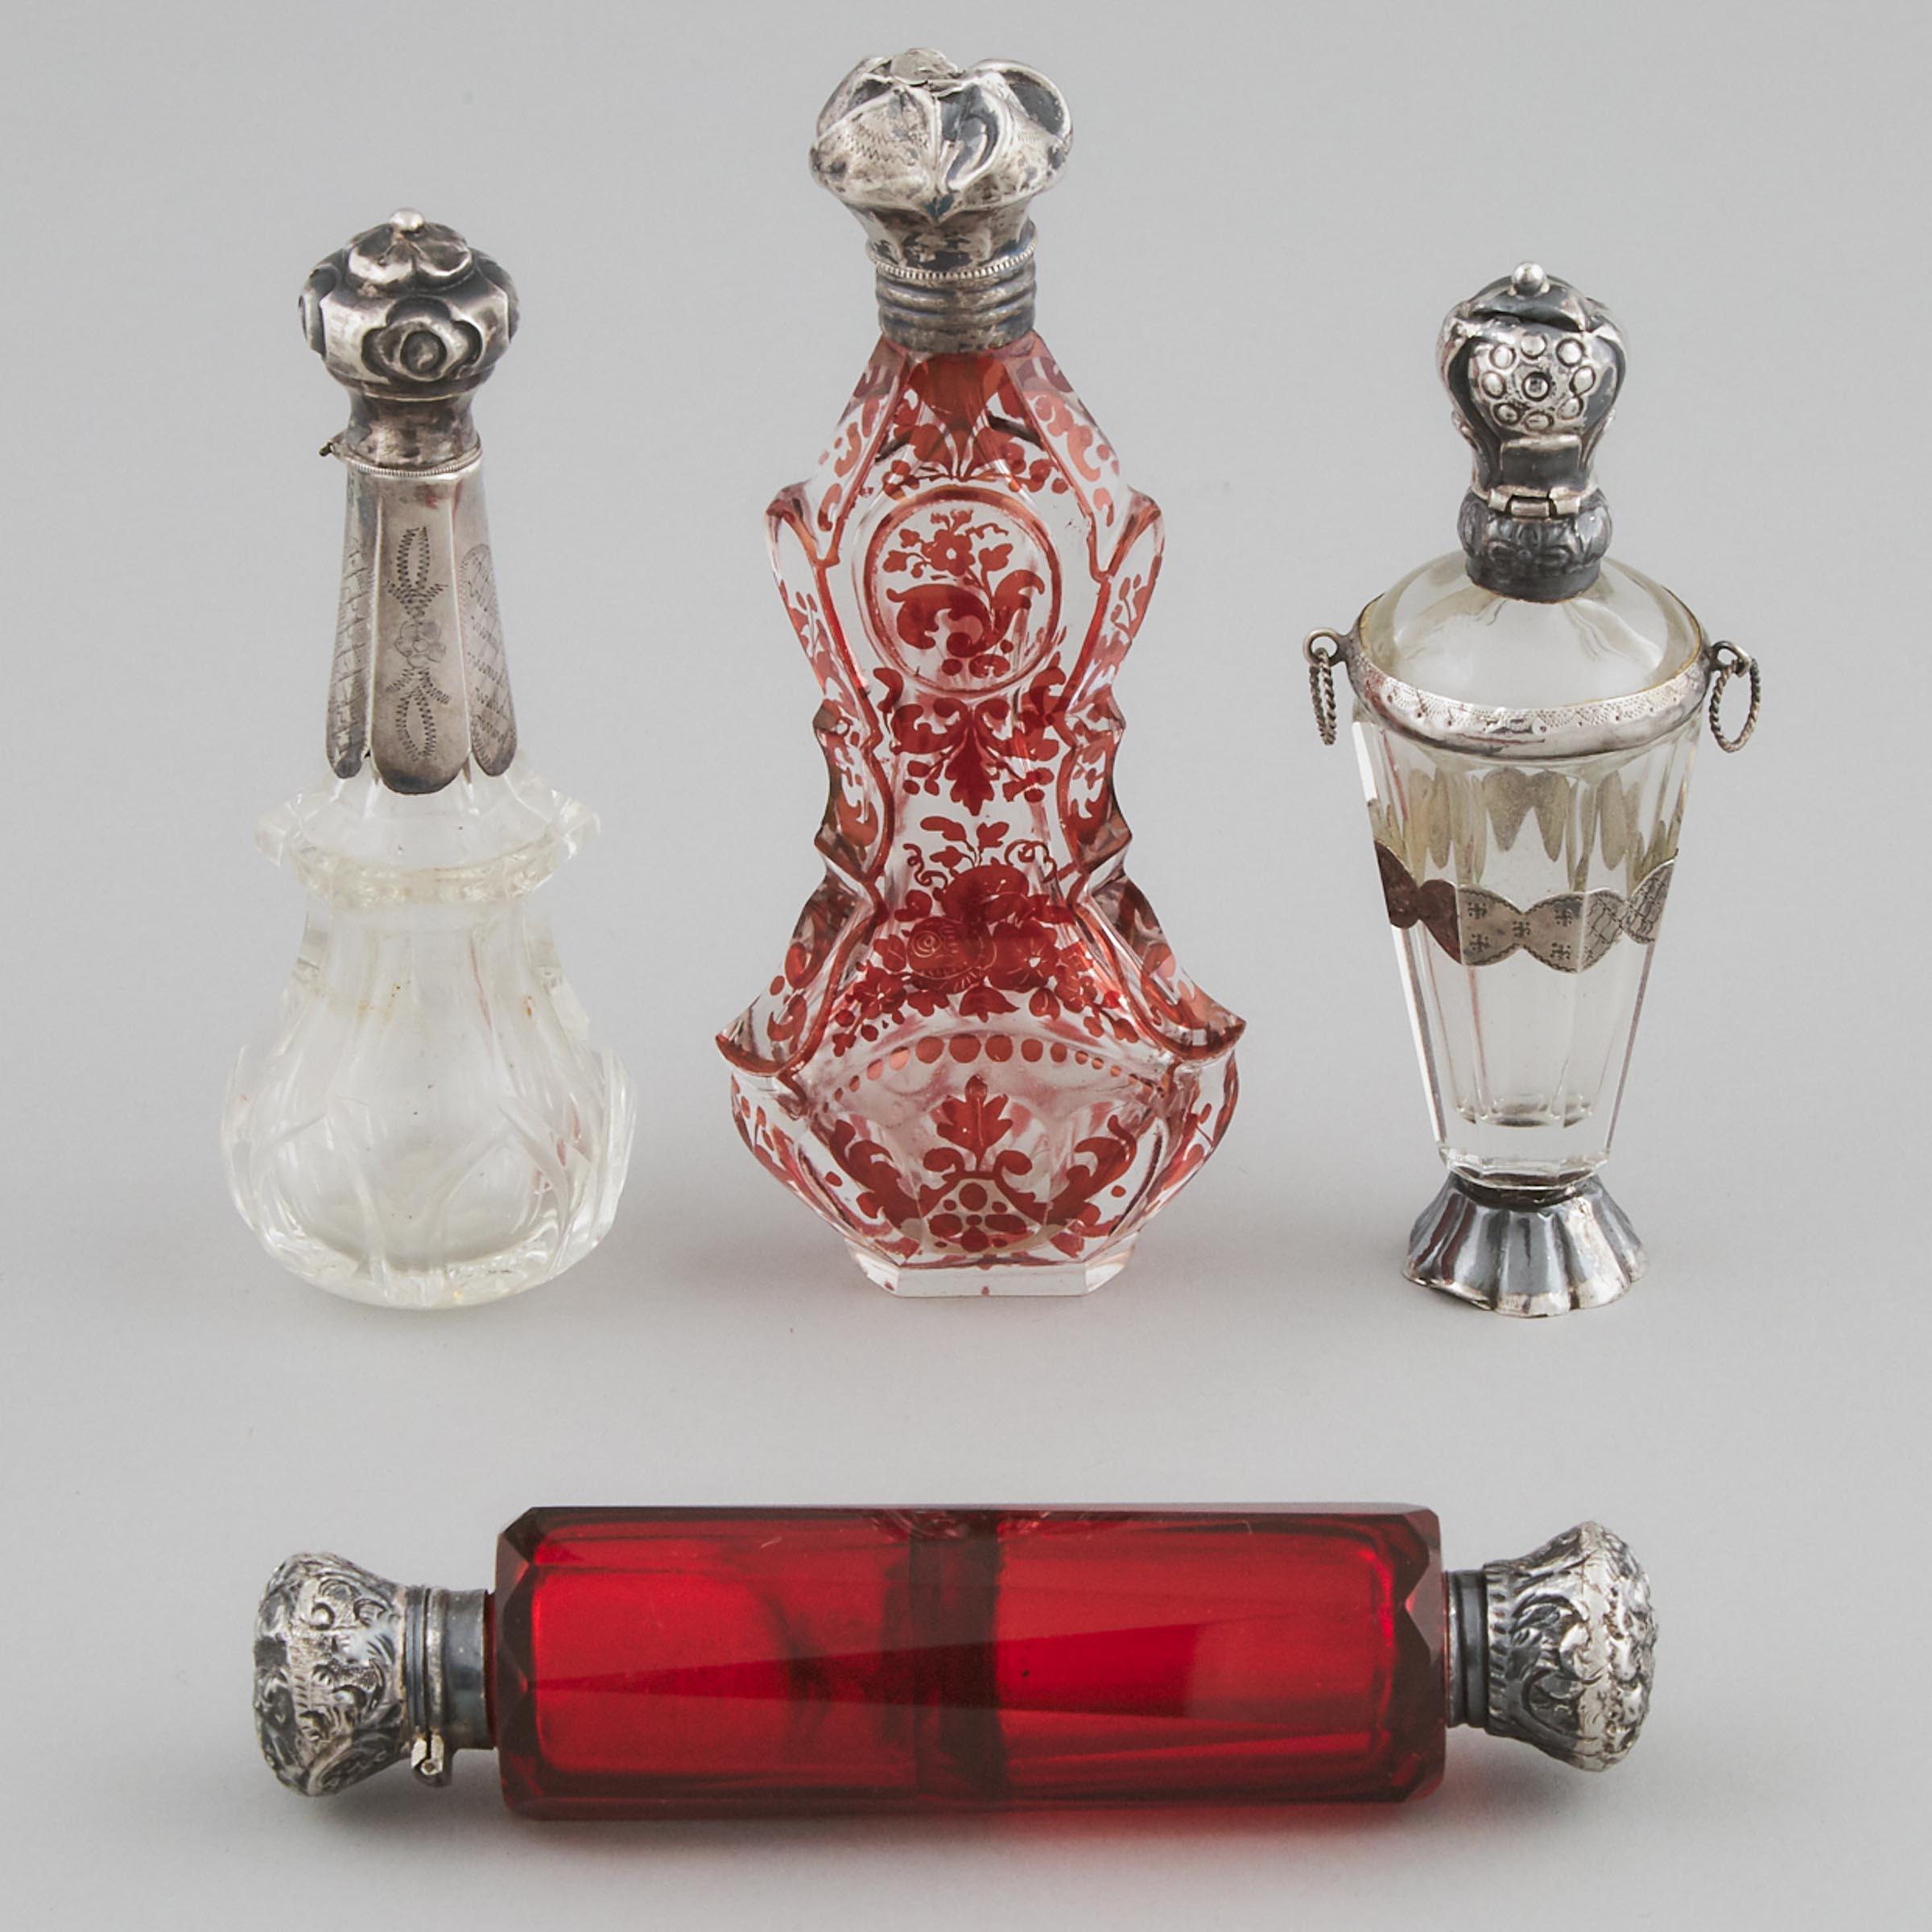 Three Dutch Silver Mounted Glass Perfume Bottles and a Double-Ended Phial, late 19th century